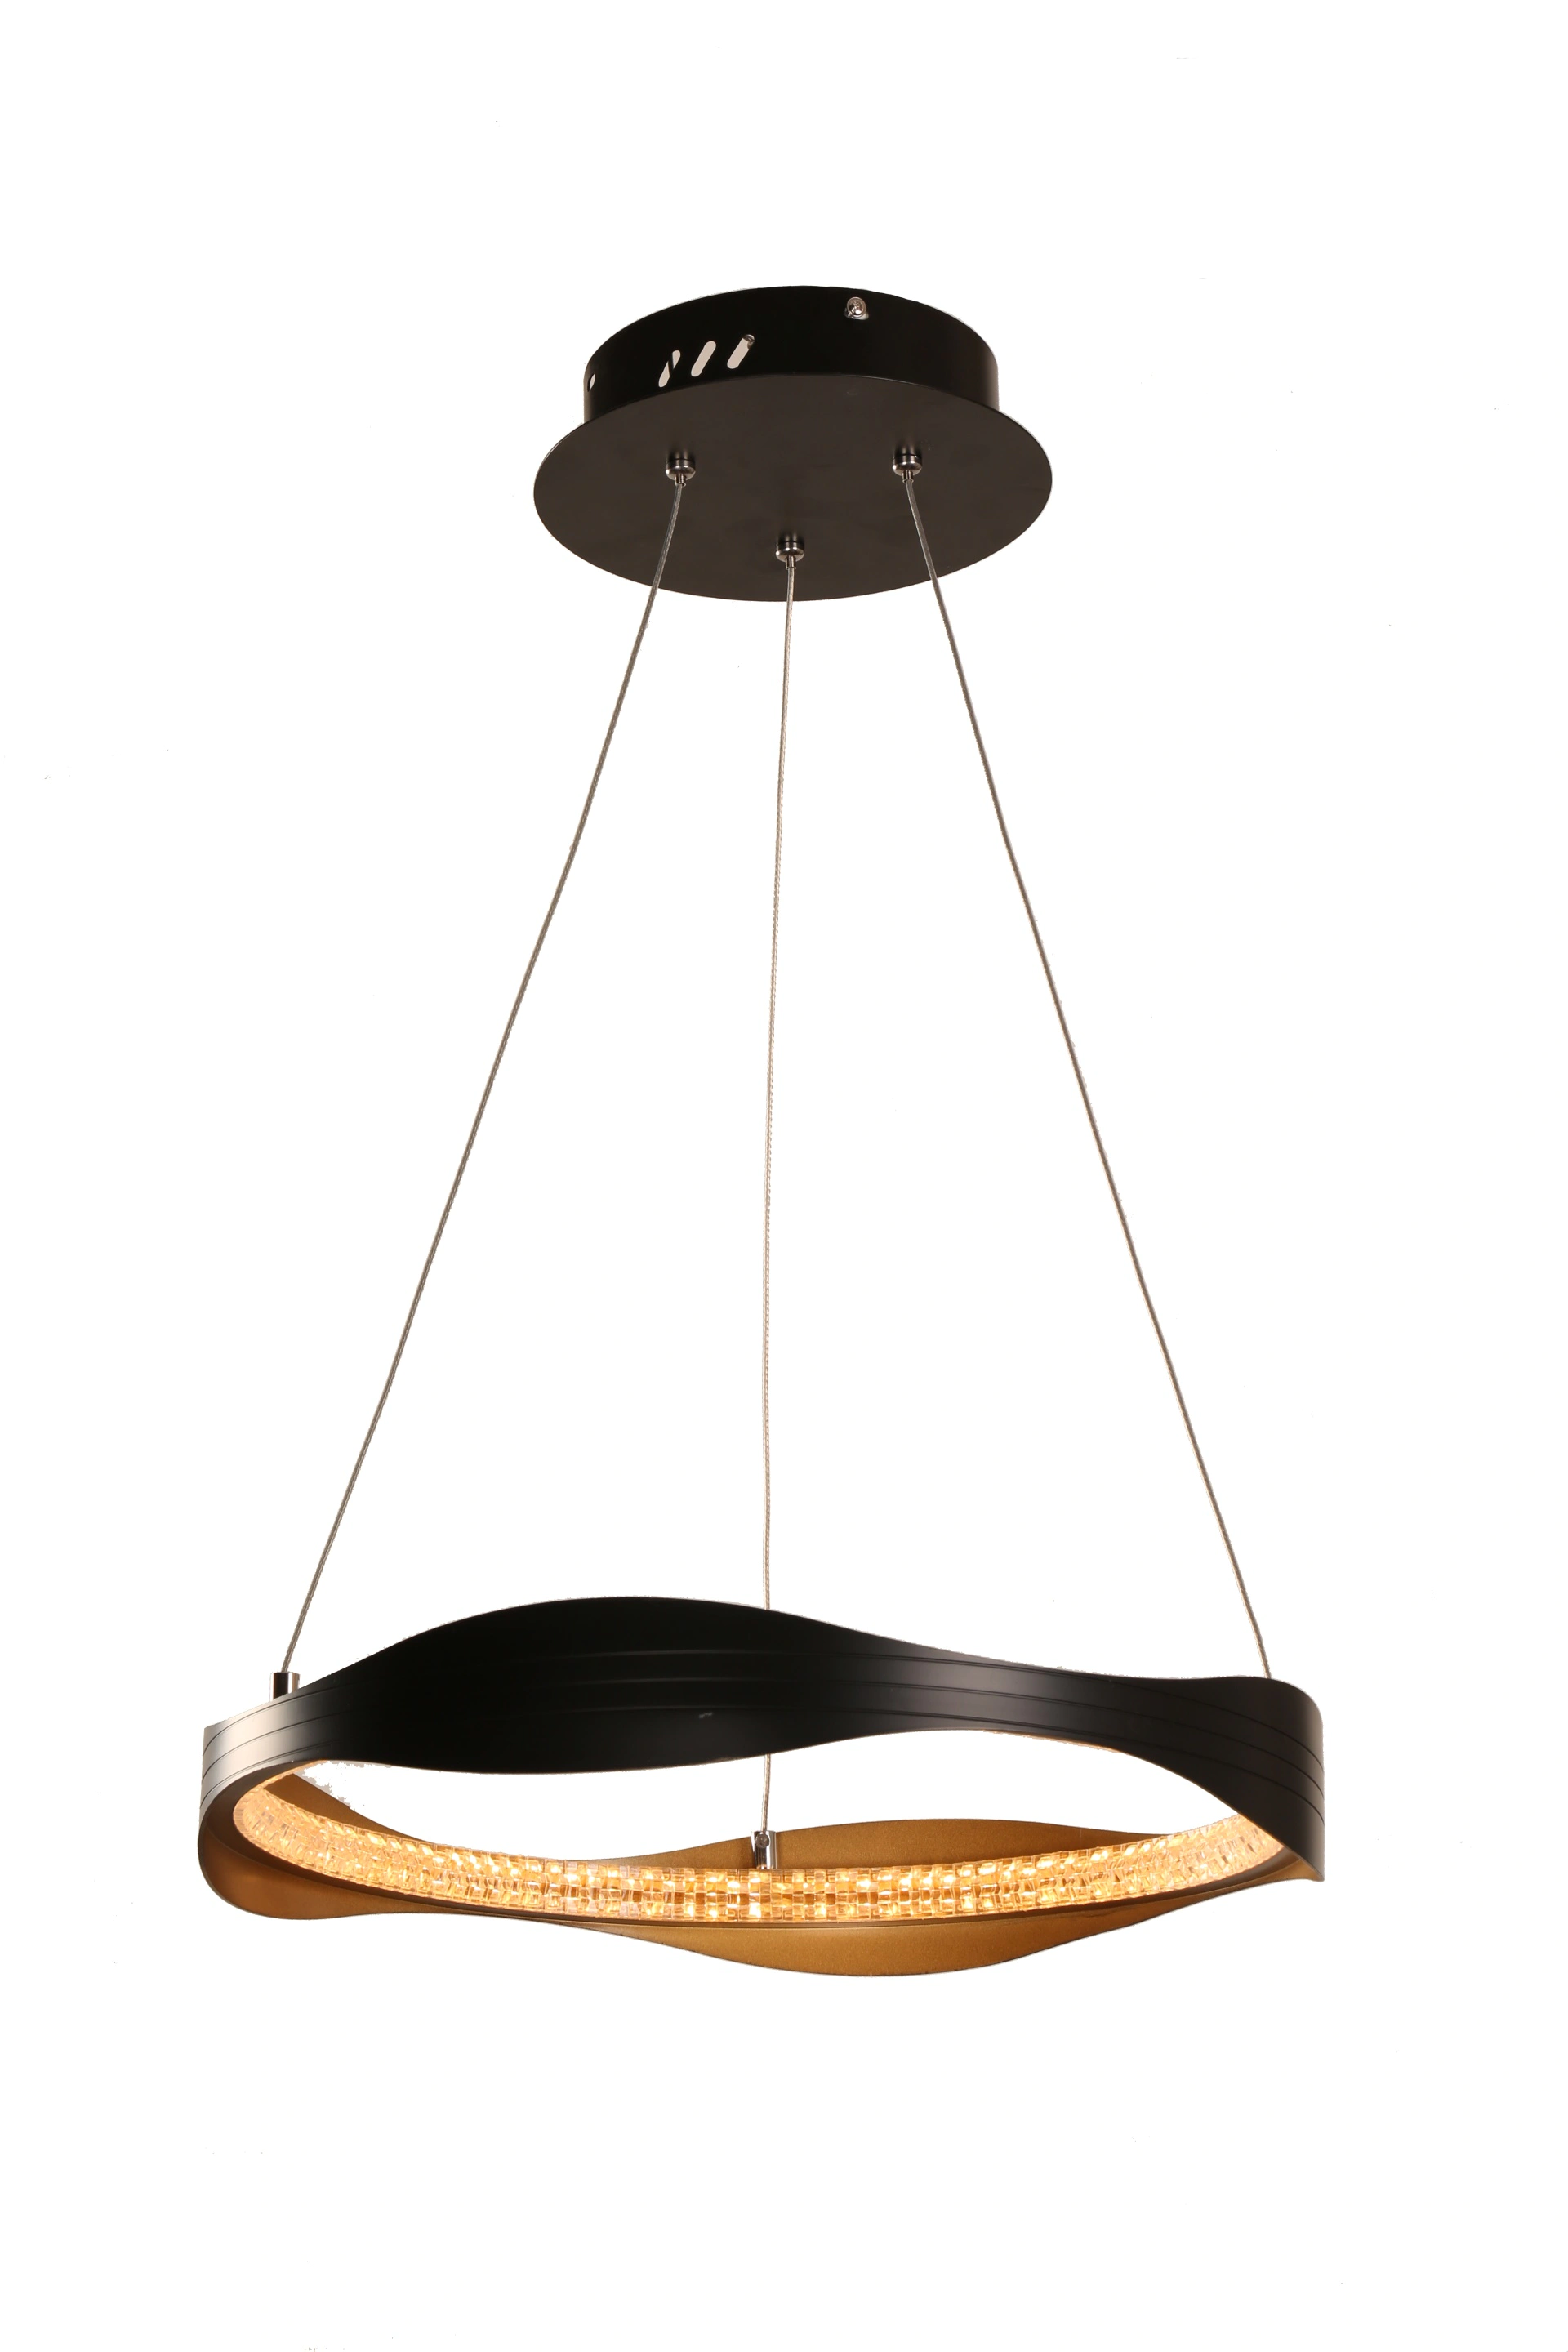 Saintly fixtures contemporary pendant lights supply for study room